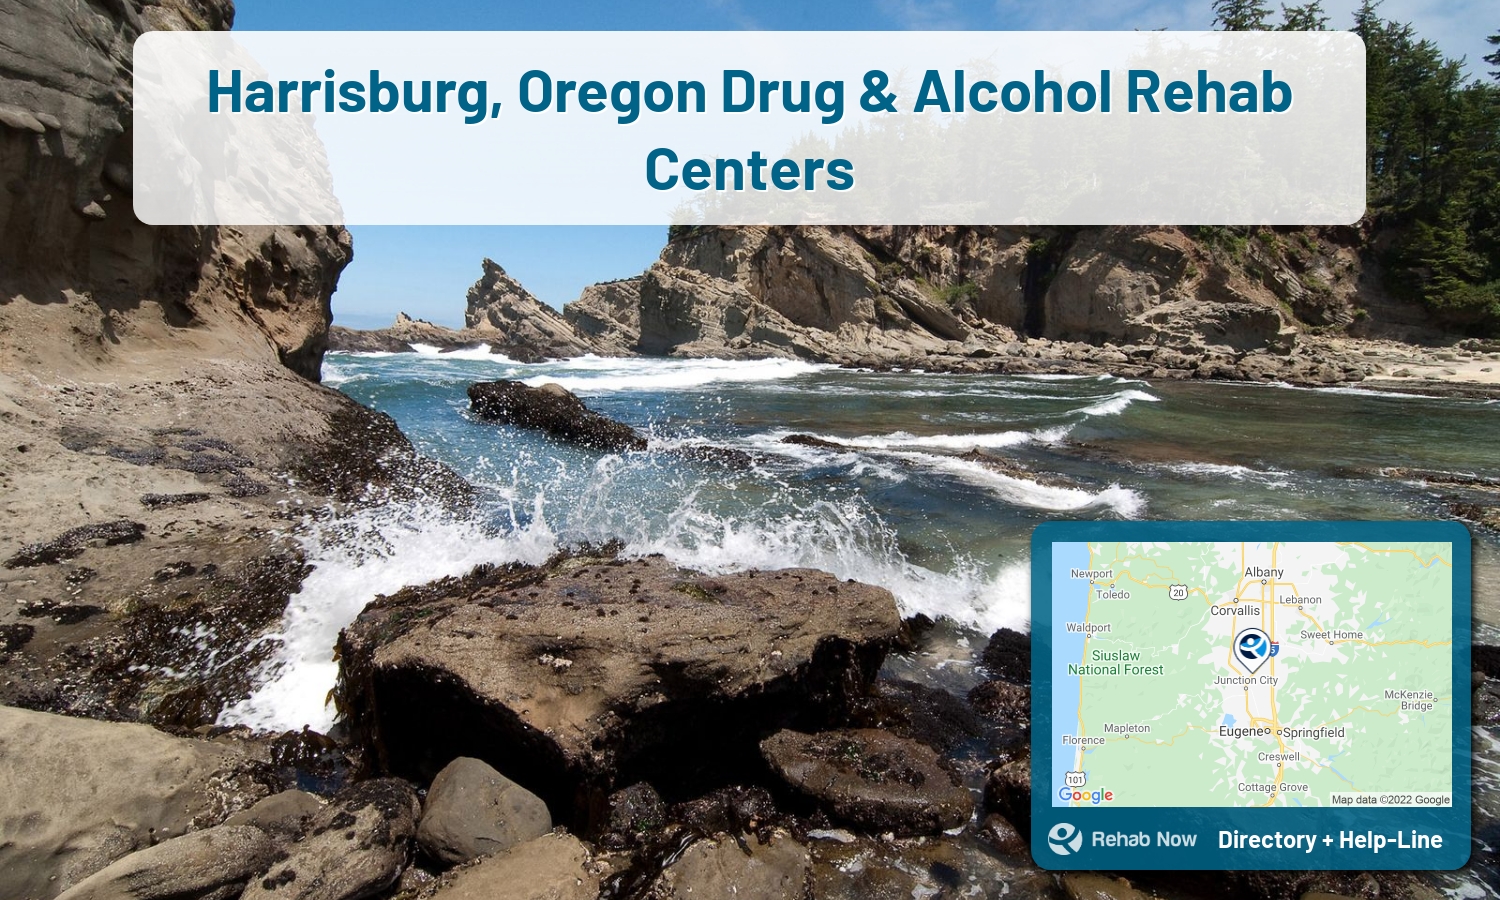 Drug rehab and alcohol treatment services nearby Harrisburg, OR. Need help choosing a treatment program? Call our free hotline!